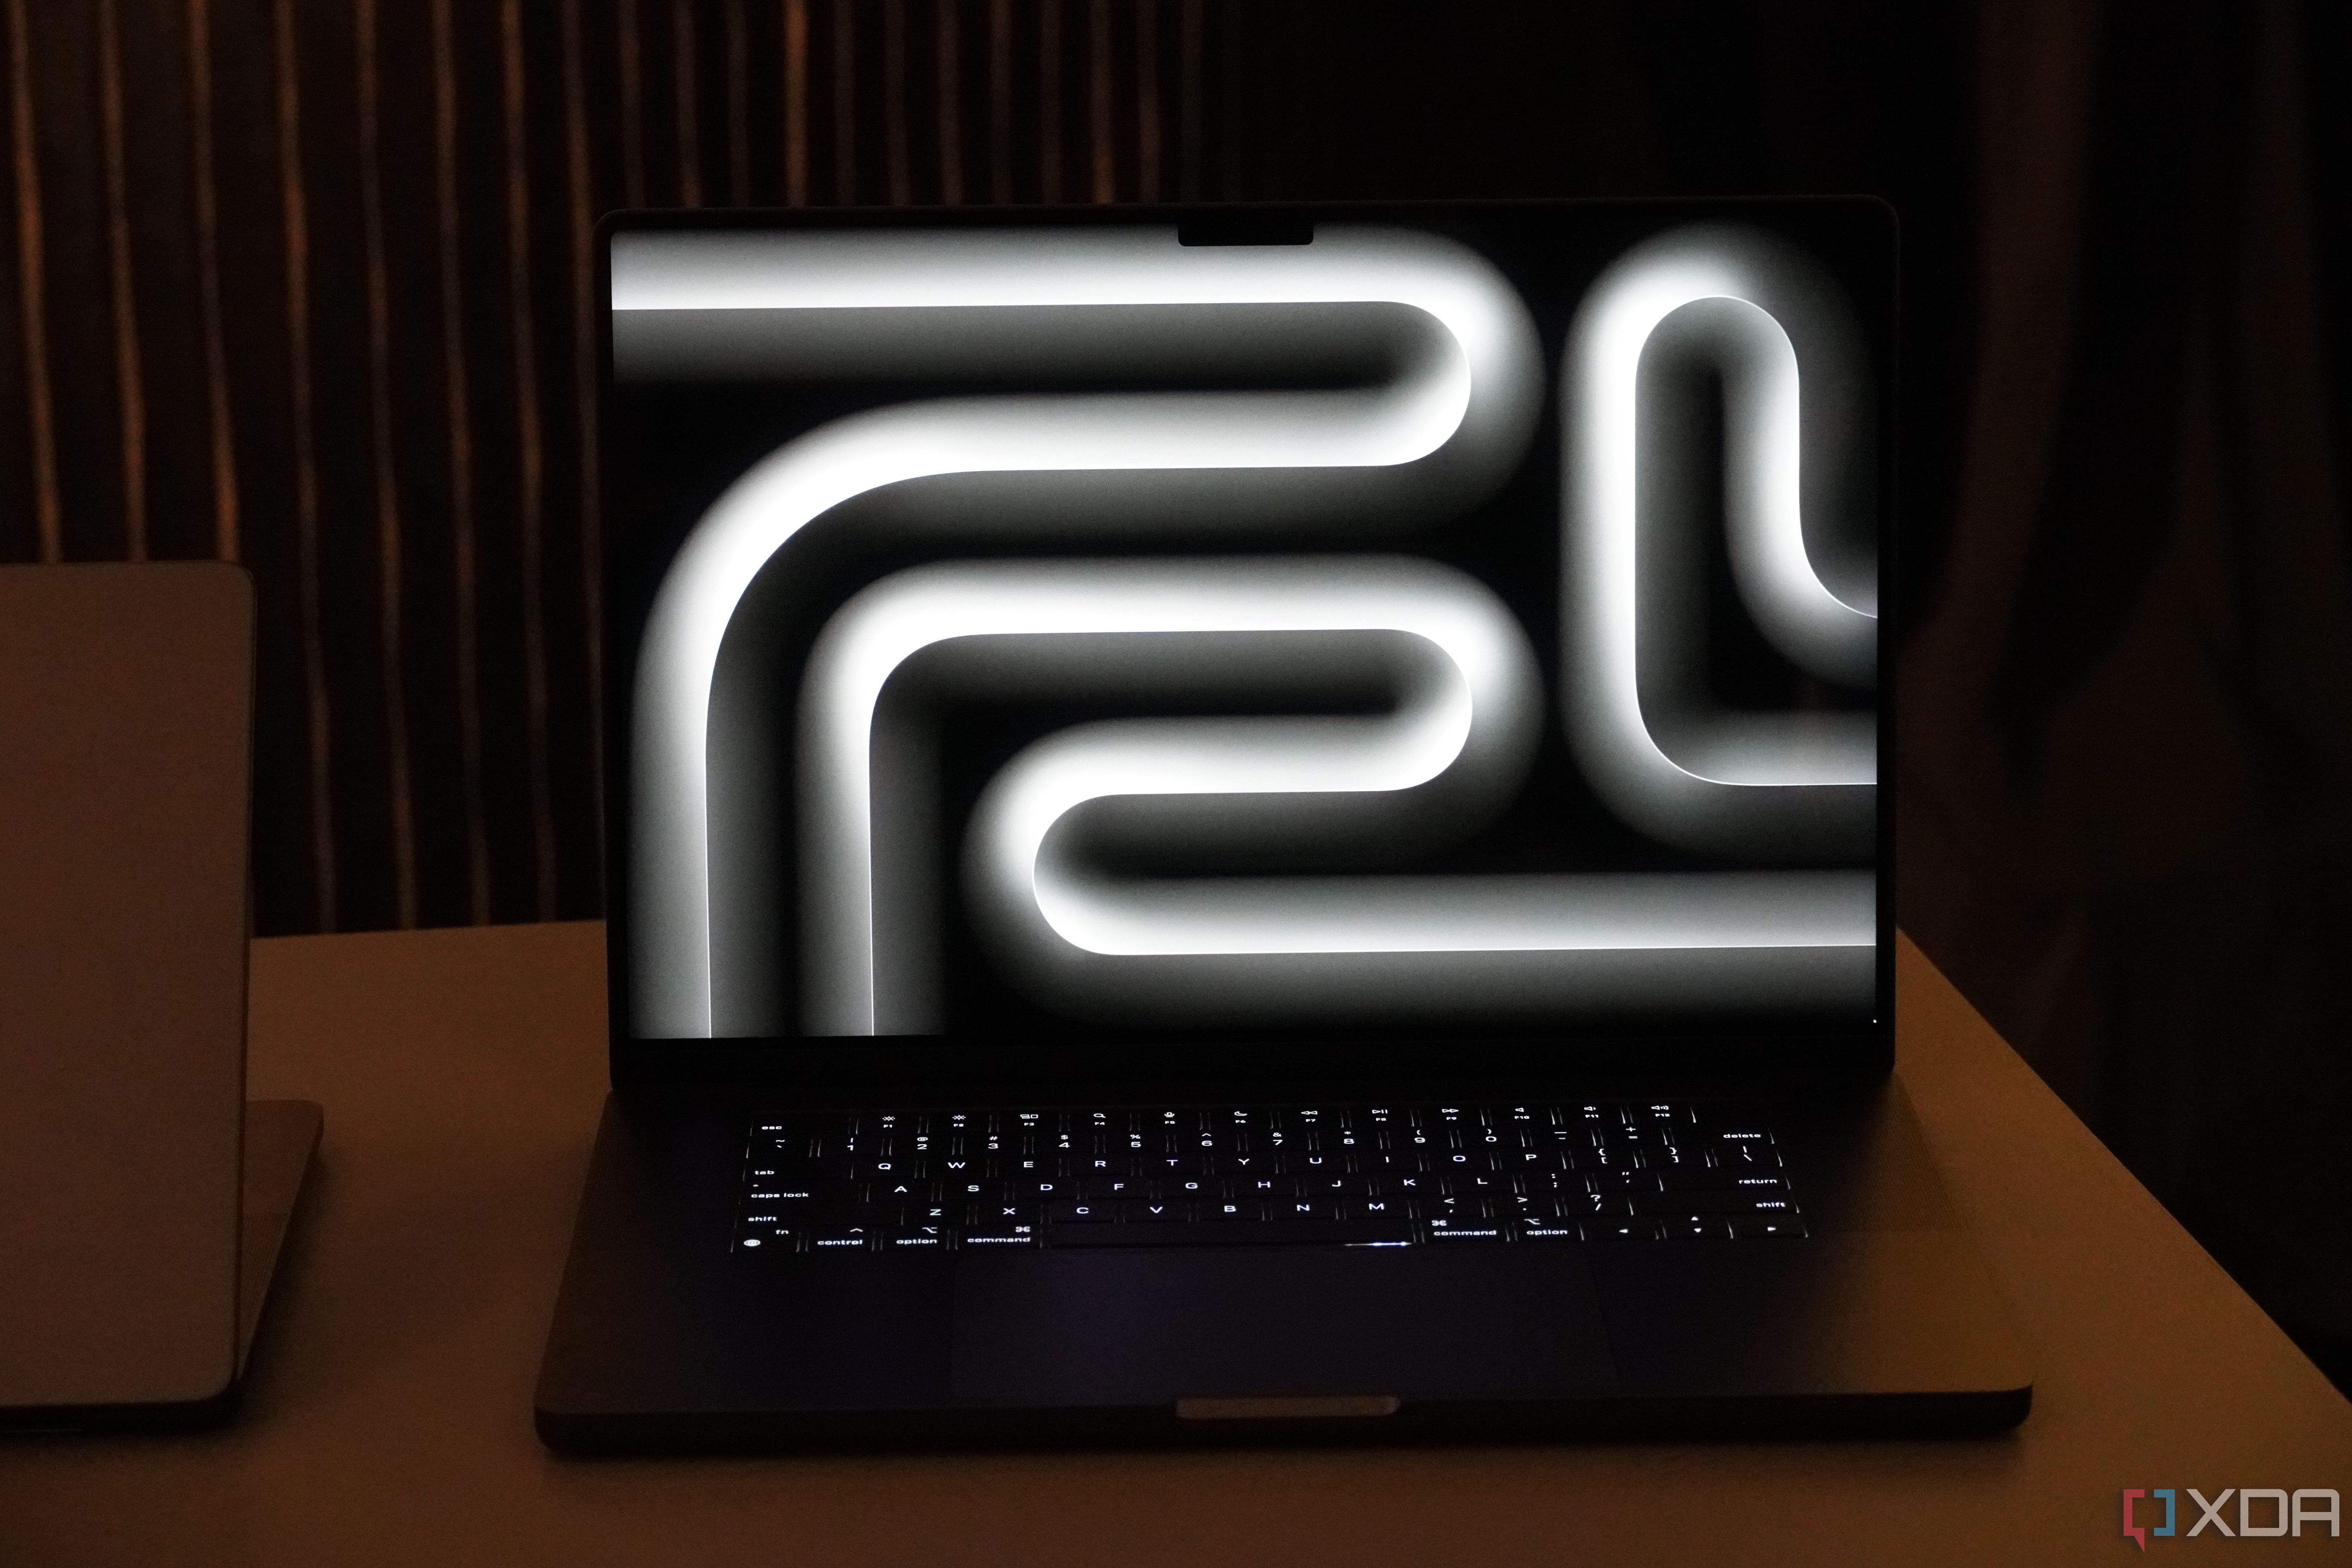 The wallpaper of the M3 MacBook Pro in Space Black.